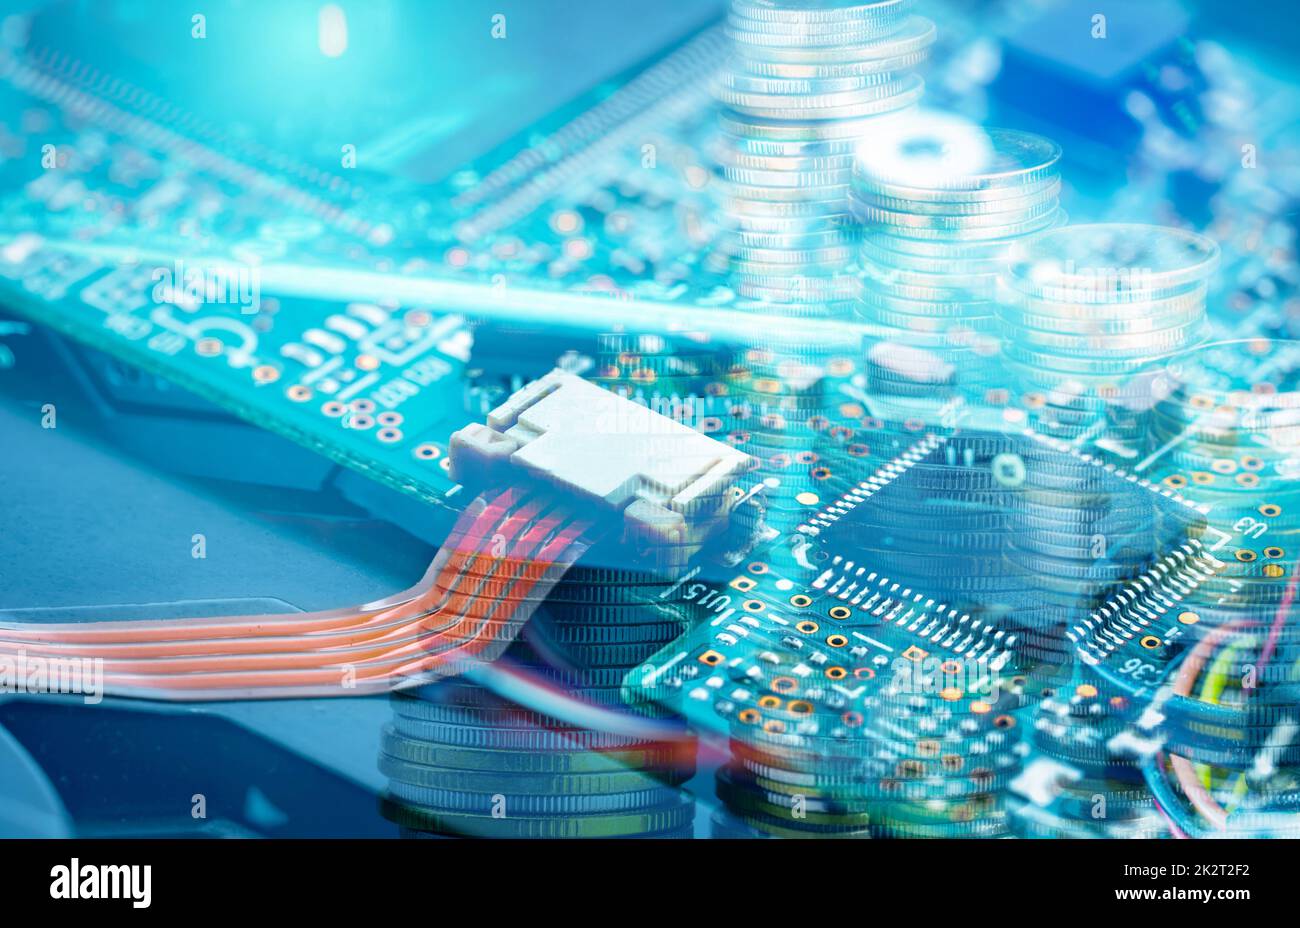 Electronic circuit board and coin stack. Mainboard of computer. Electronic business industry.  Computer integrated circuit board. Memory of digital information hardware. Electronic engineering tech. Stock Photo